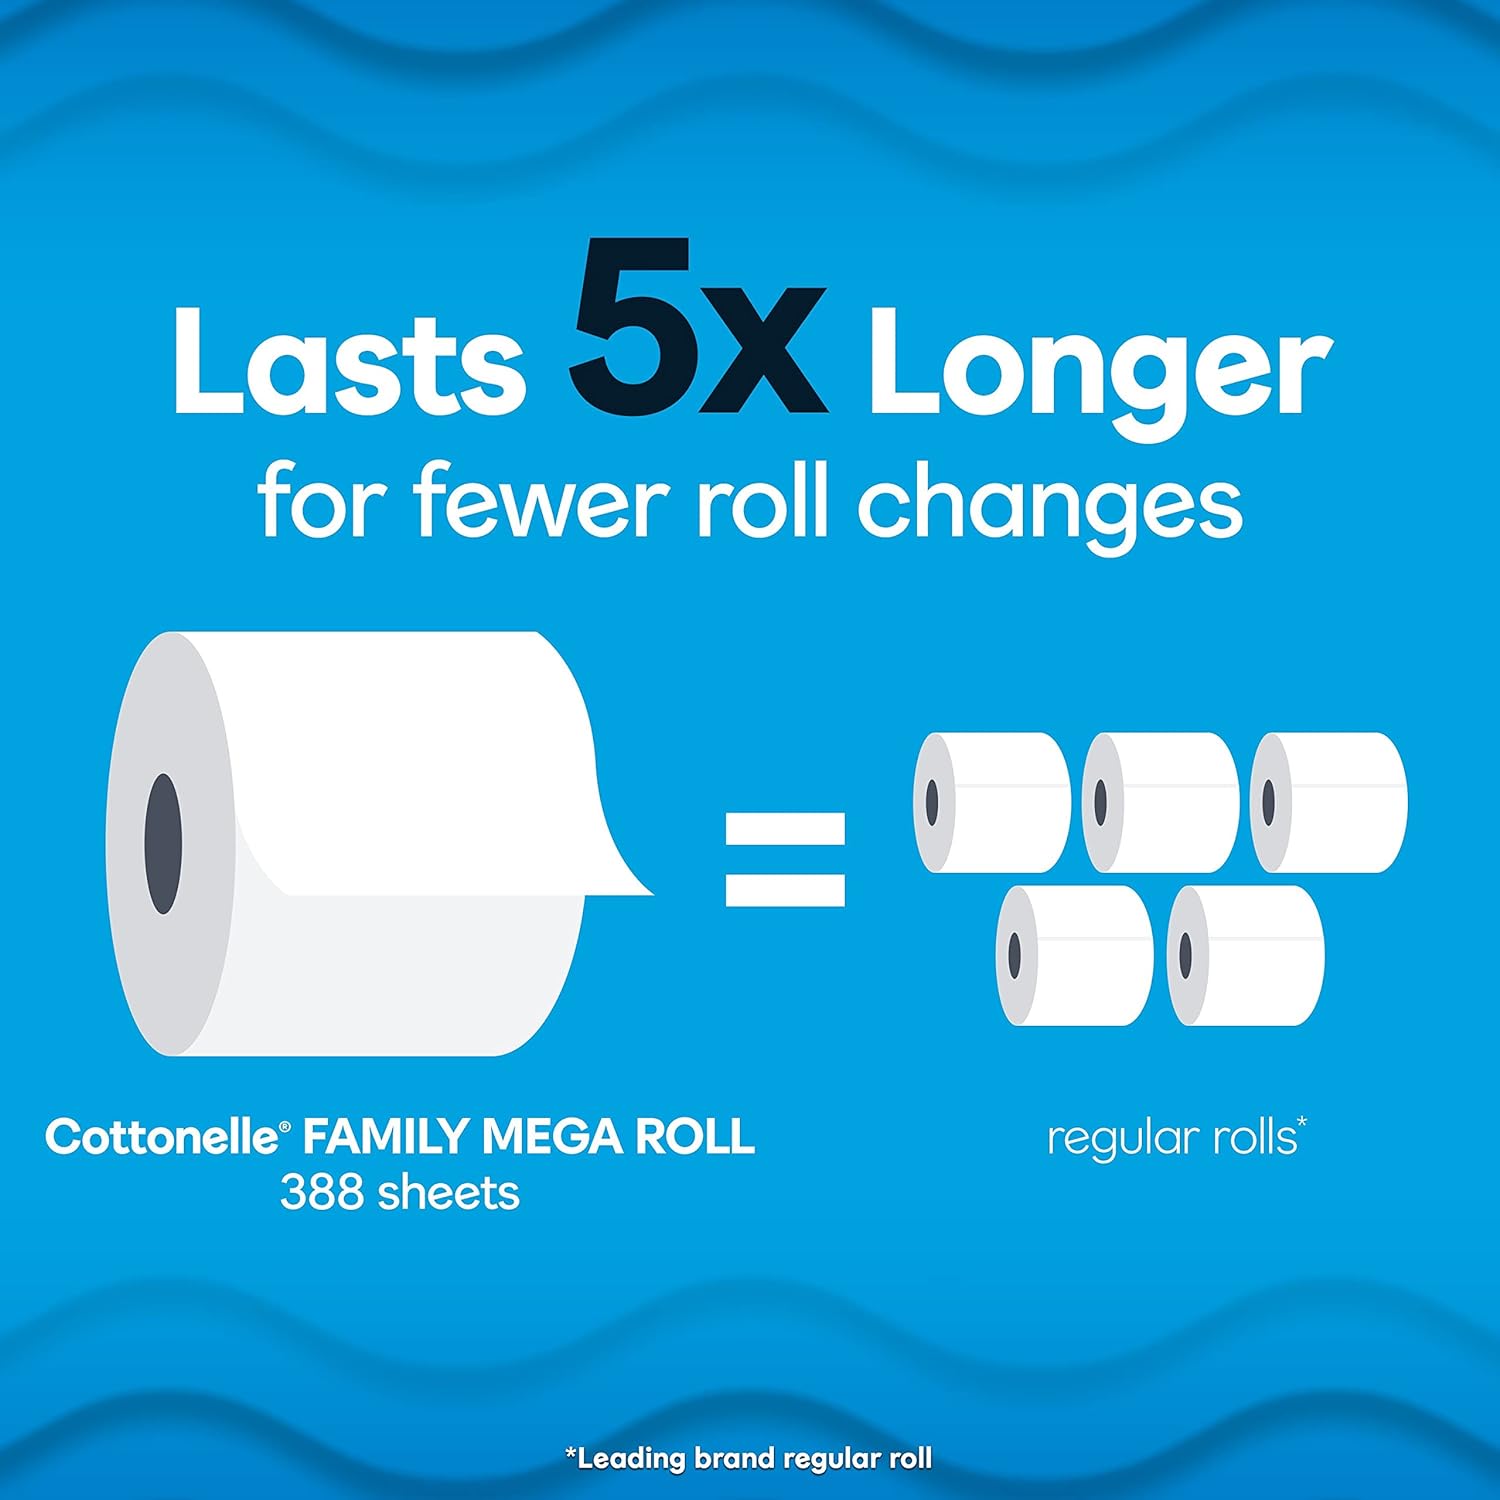 Cottonelle Ultra Clean Toilet Paper with Active CleaningRipples, 1-Ply, 24 Family Mega Rolls (4 Packs of 6) (24 Family Mega Rolls = 132 Regular Rolls), 388 Sheets per Roll, Packaging May Vary